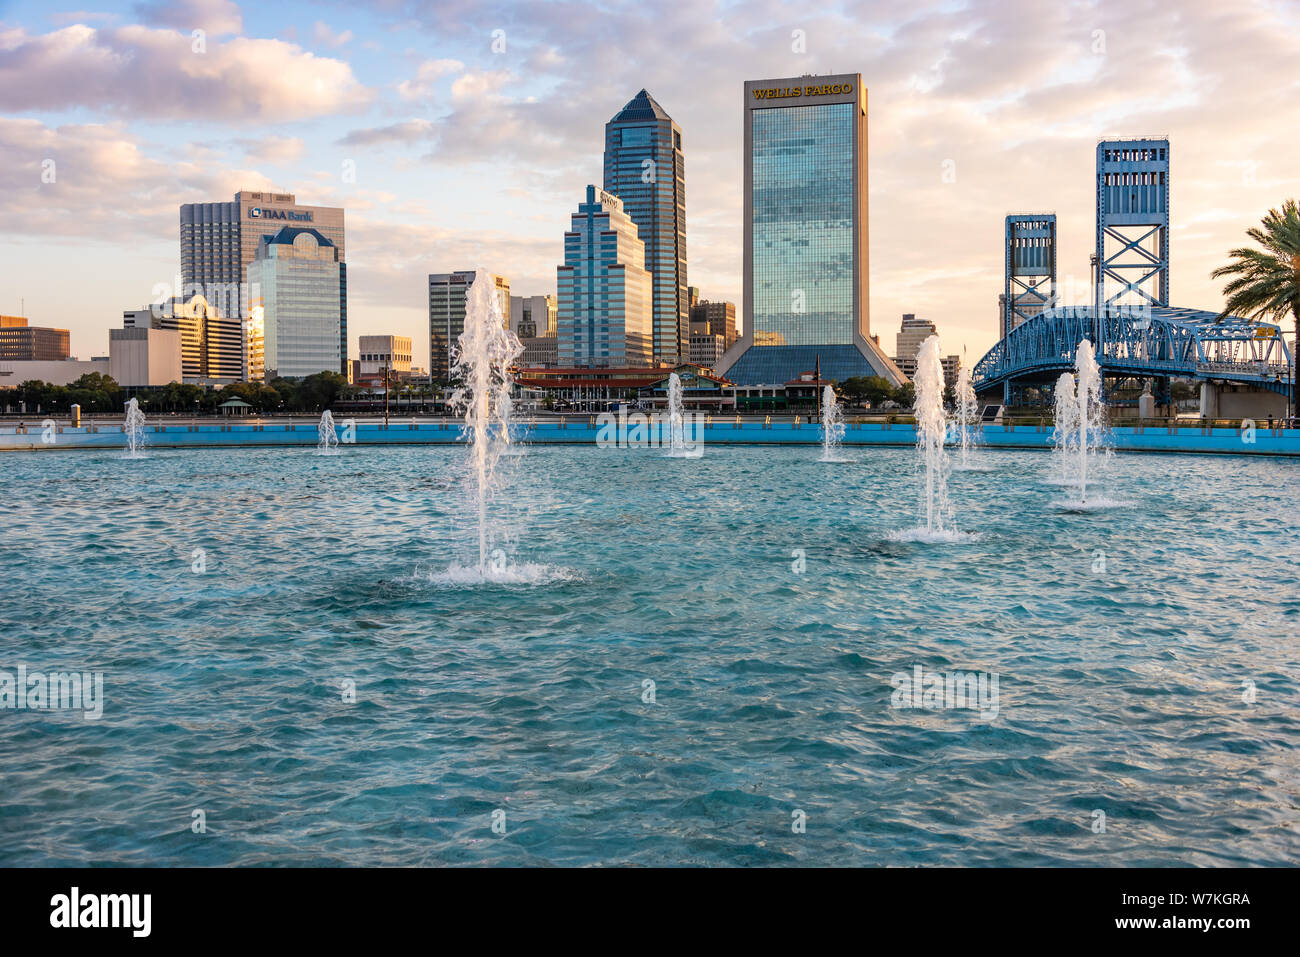 Downtown Jacksonville, Florida at sunrise from Friendship Fountain on the Southbank Riverwalk along the St. Johns River. (USA) Stock Photo